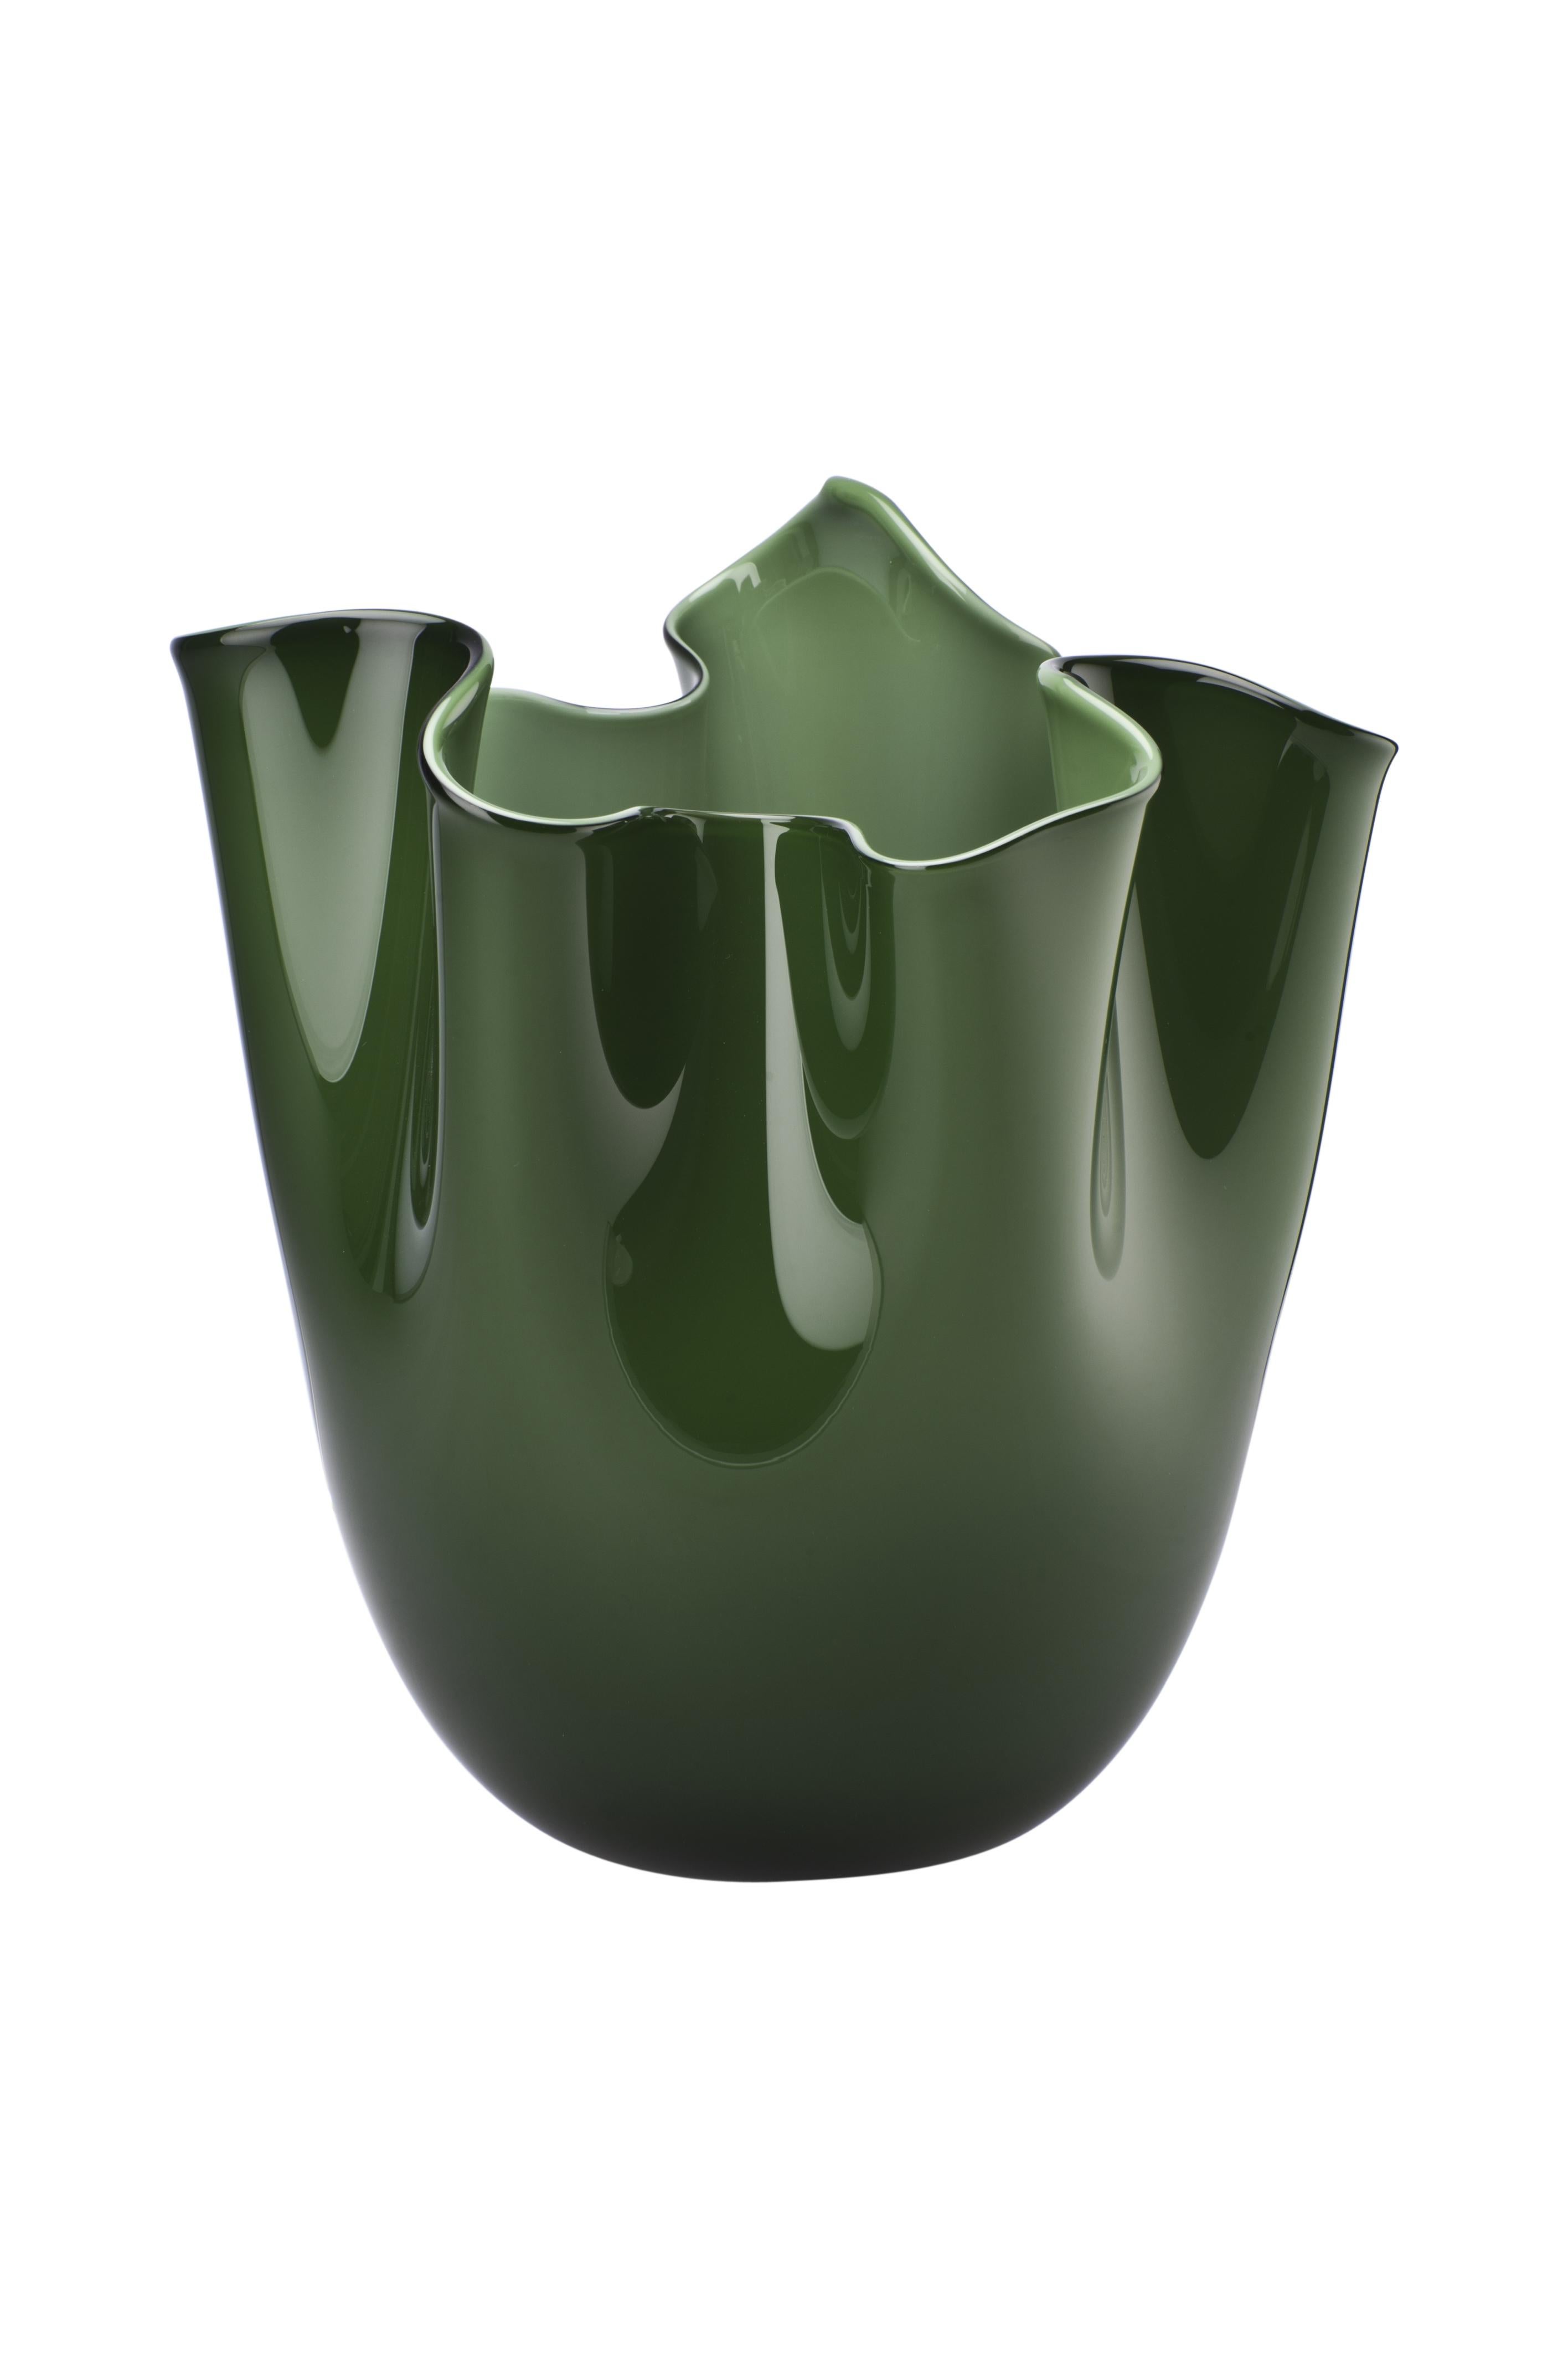 Venini glass vase with pinched rim in apple green designed by Fulvio Bianconi and Paolo Venini in 1948. Perfect for indoor home decor as container, vide-poche or statement piece for any room. Also available in other colors on 1stdibs.

Dimensions: